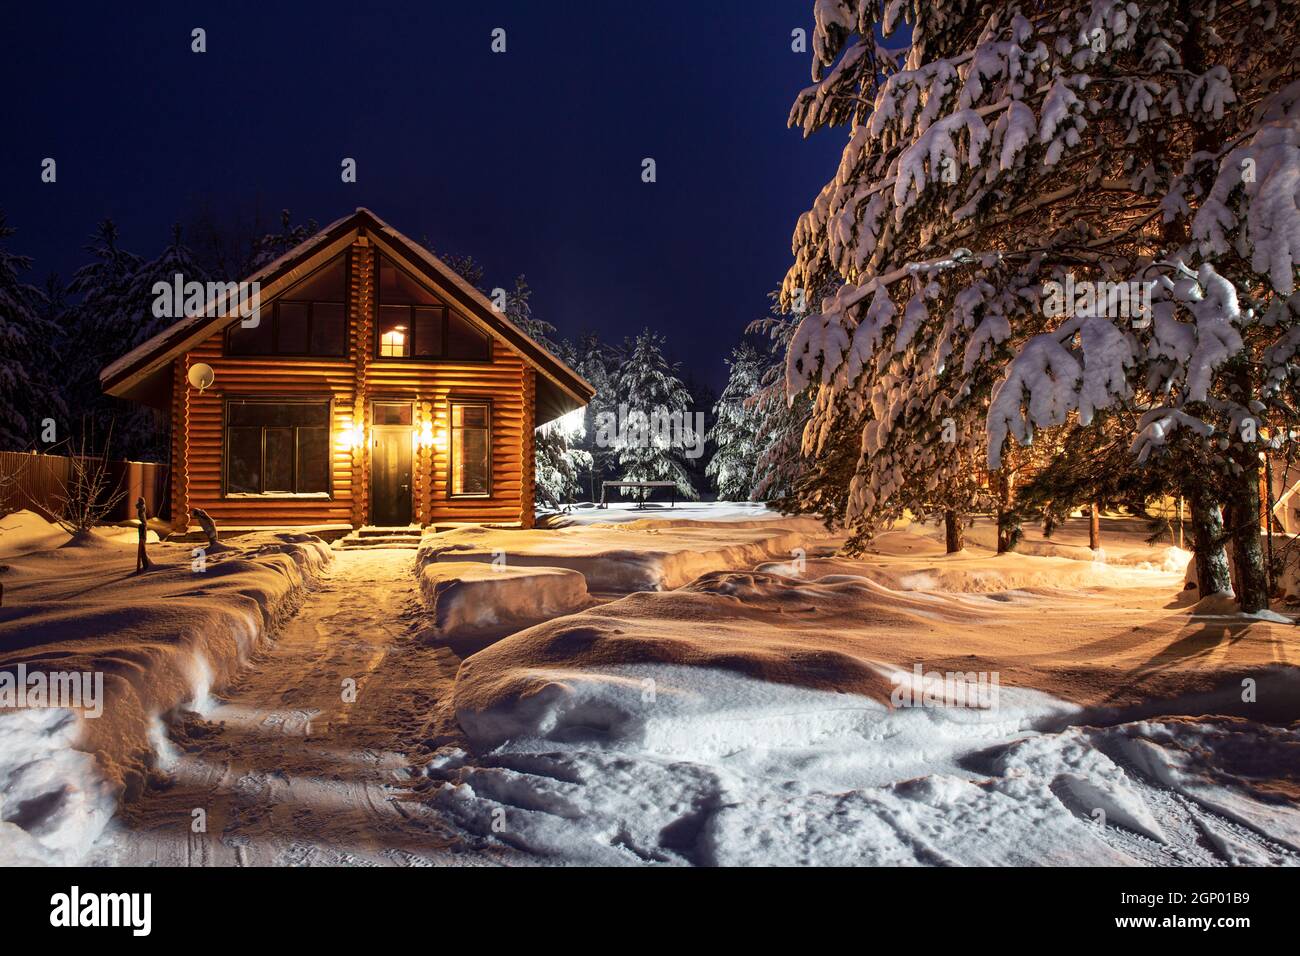 A path in the courtyard leading to a village log house, snow-covered pine trees, a fabulous winter night. Rural beautiful winter landscape. Renting Stock Photo